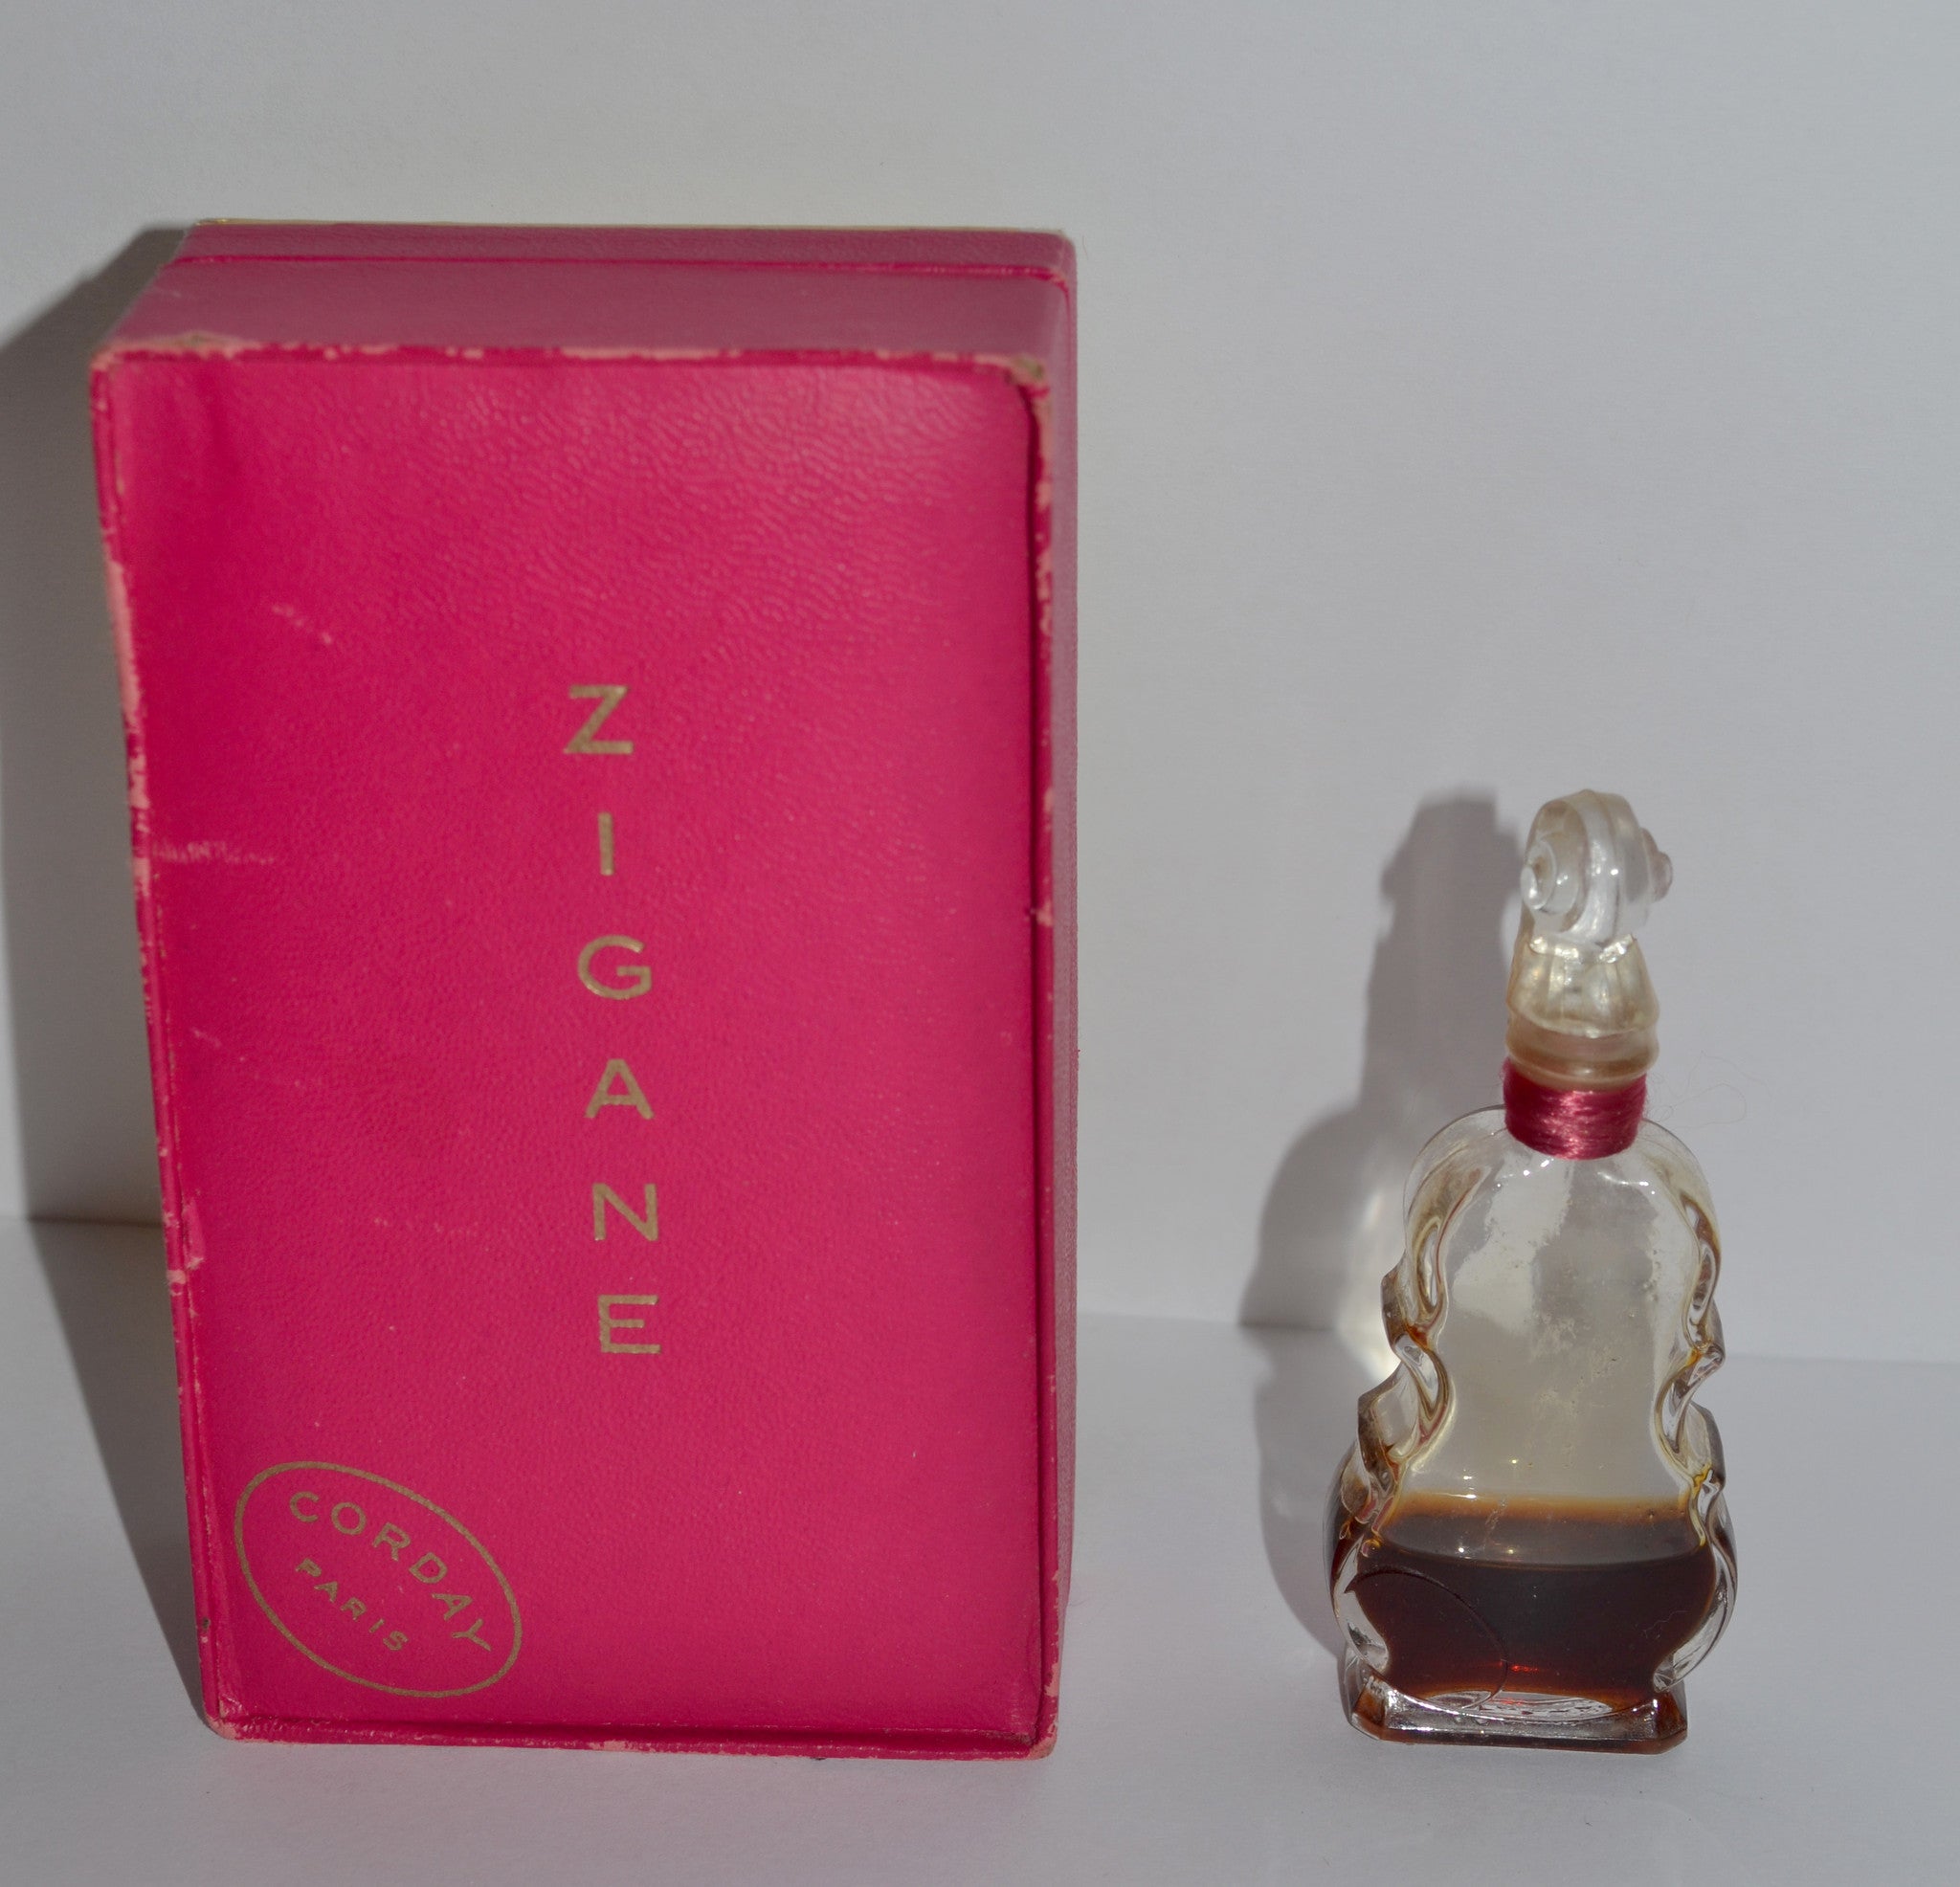 Vintage Zigane Perfume By Corday – Quirky Finds